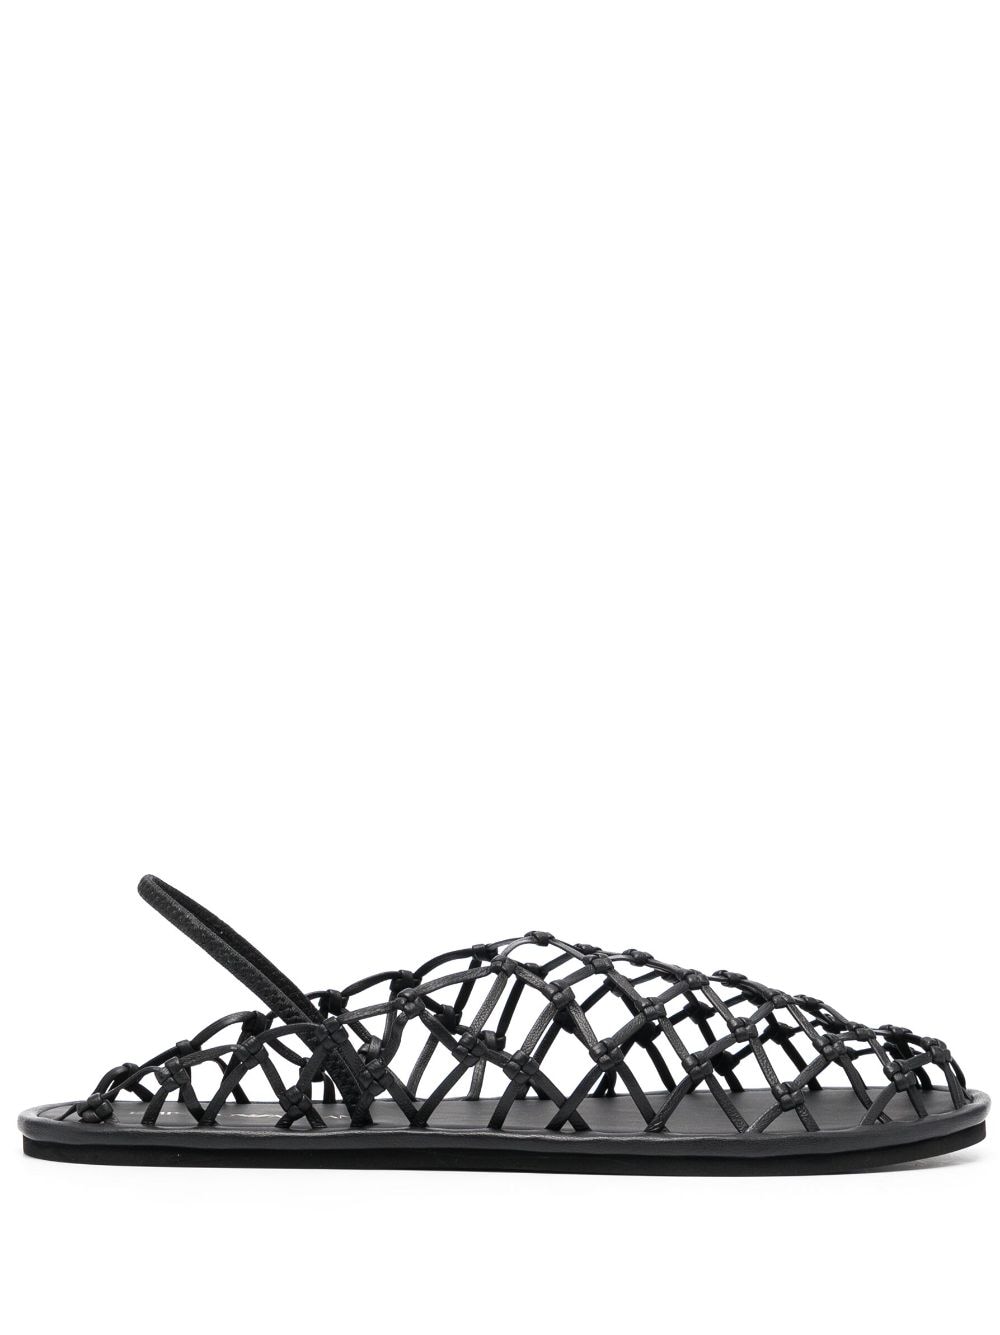 Emporio Armani Knot-detail Leather Sandals In Black